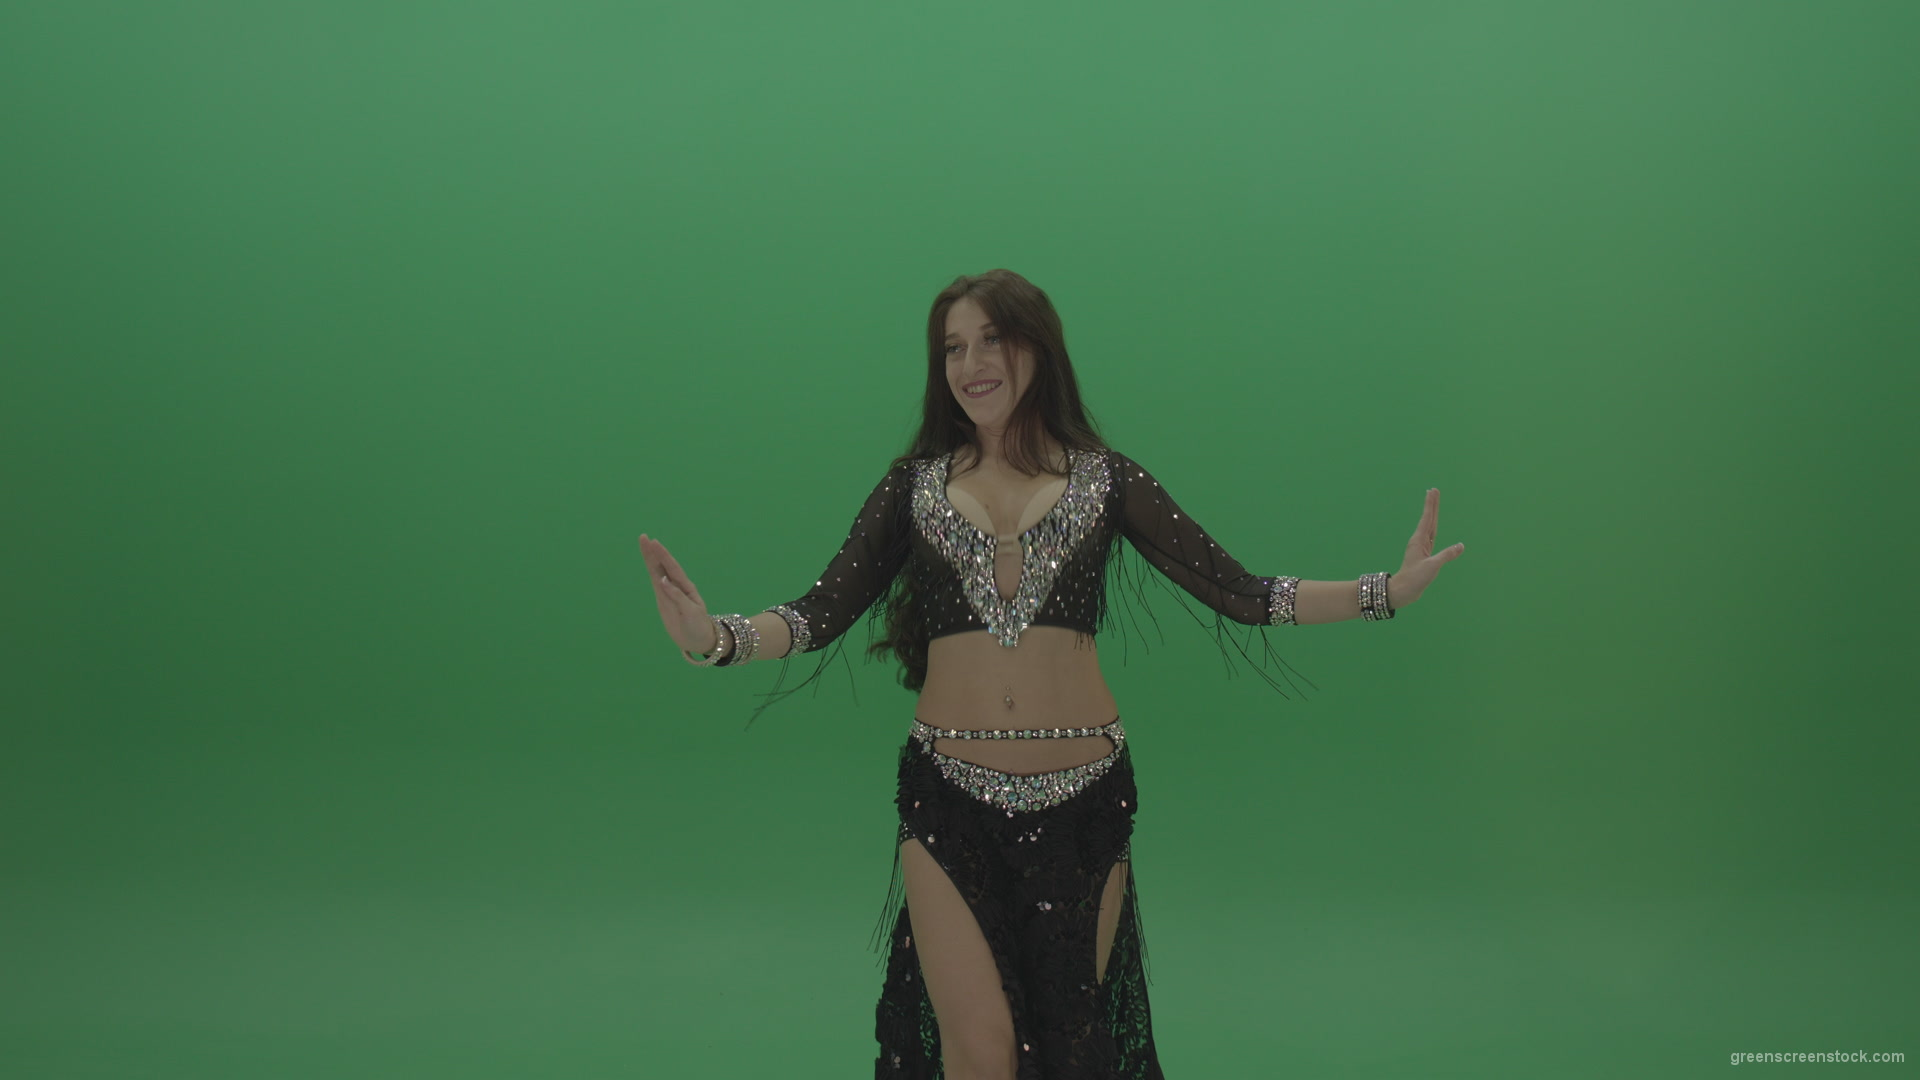 Refined-belly-dancer-in-black-wear-display-amazing-dance-moves-over-chromakey-background_007 Green Screen Stock